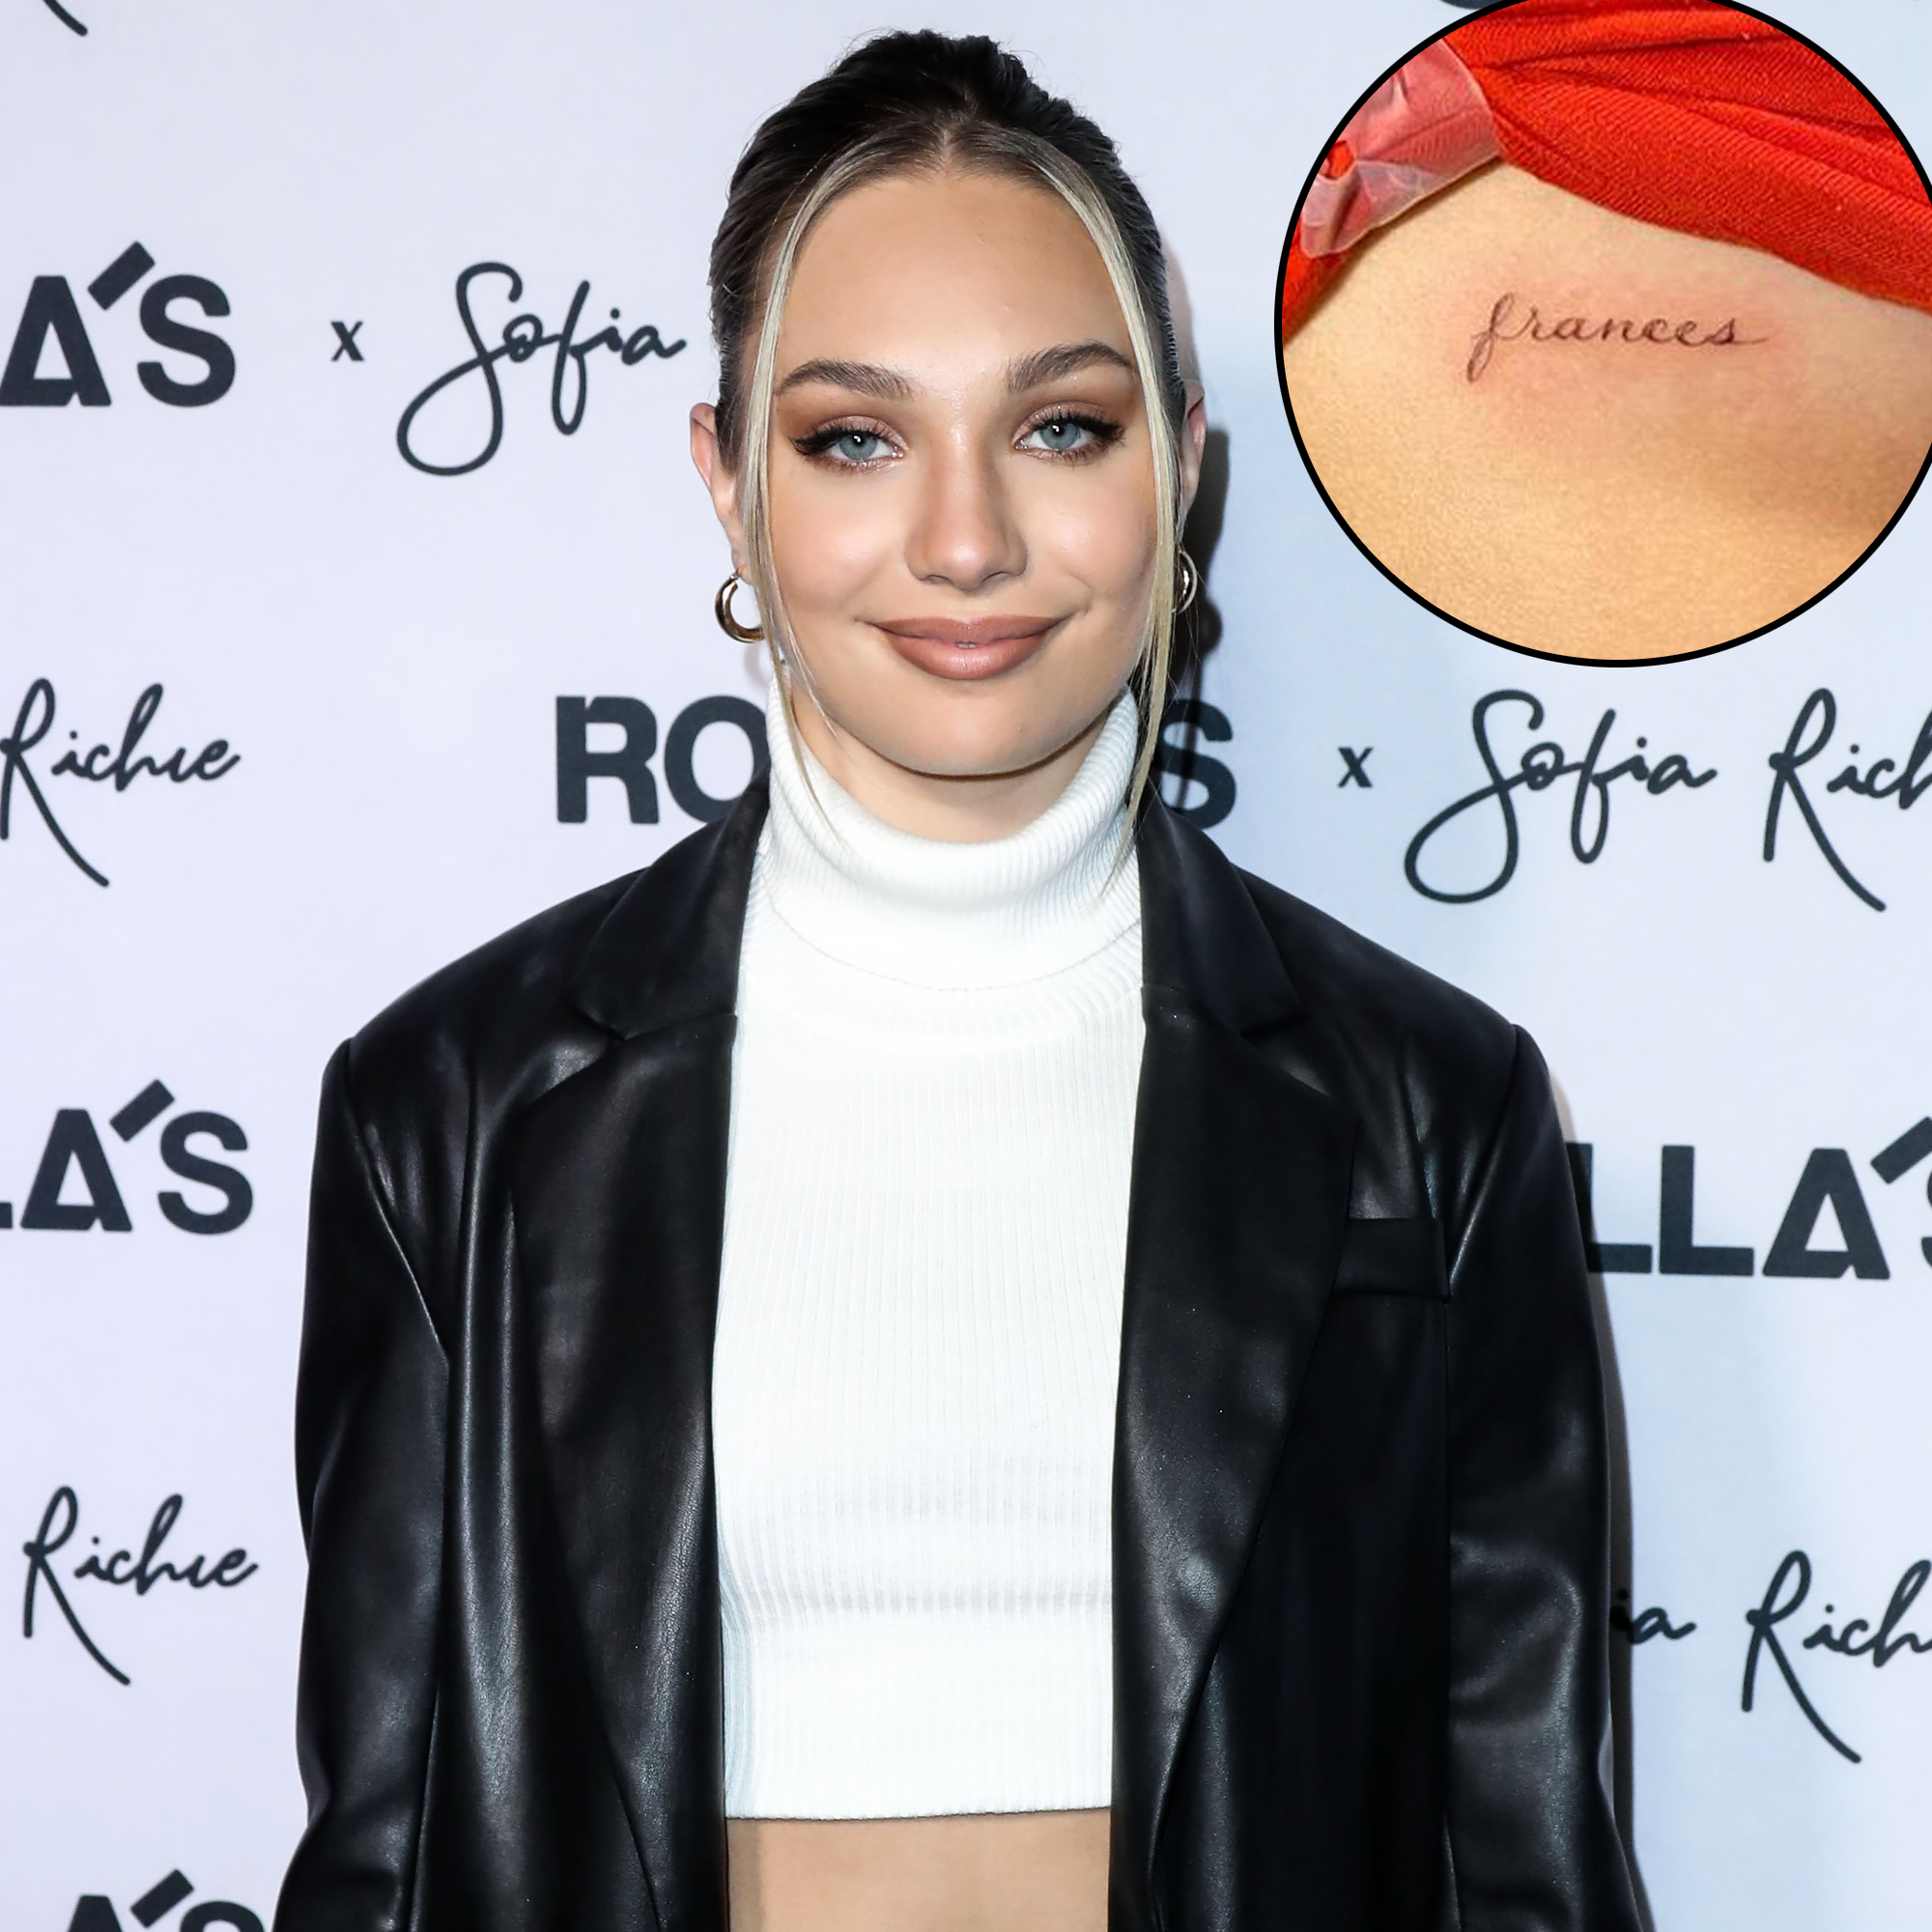 Maddie Ziegler Gets 1st Tattoo in Honor of Her 18th Birthday